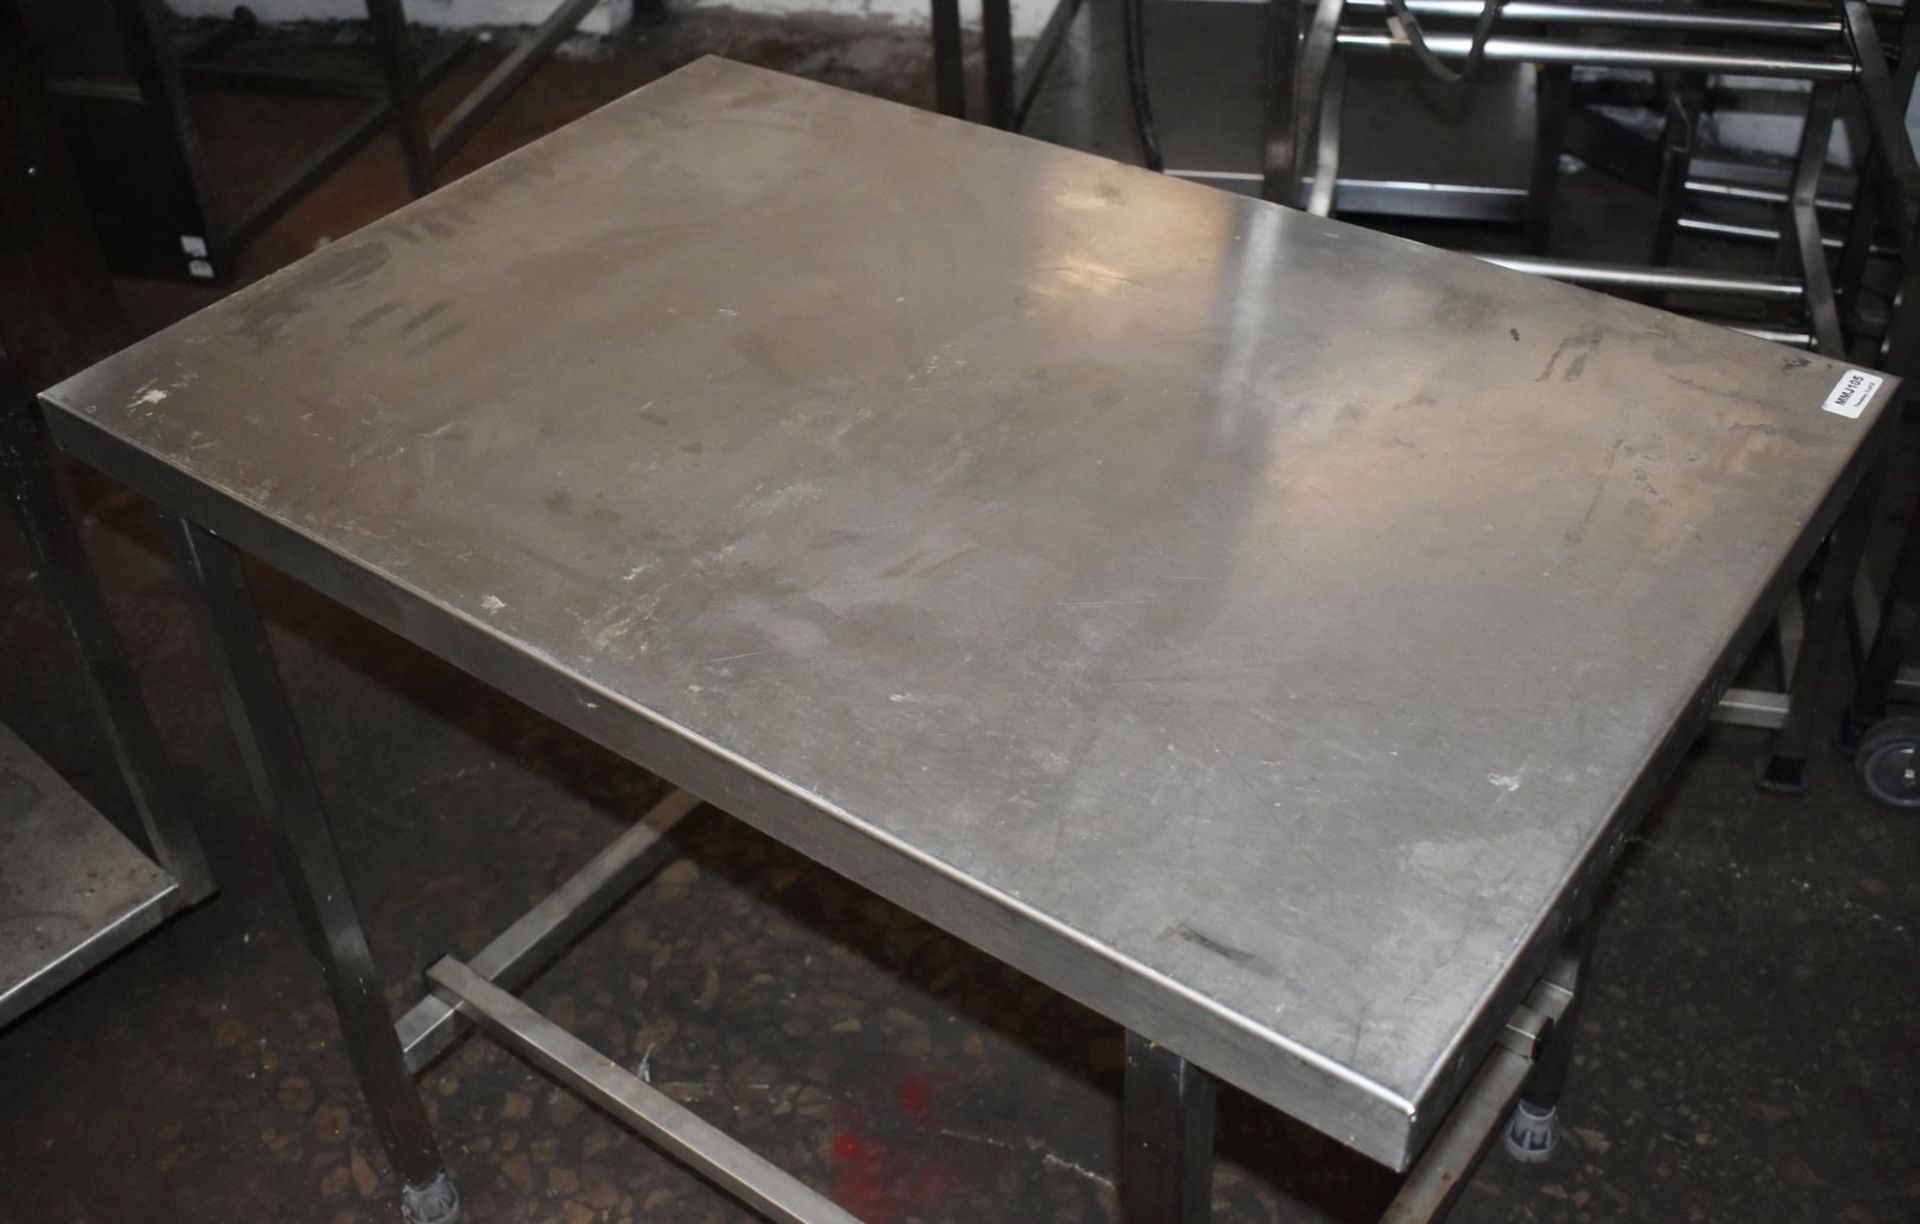 1 x Stainless Steel Prep Table - Size: H77 x W93 x D61 cms - CL675 - Ref: MMJ105 WH5 - Location: - Image 2 of 4